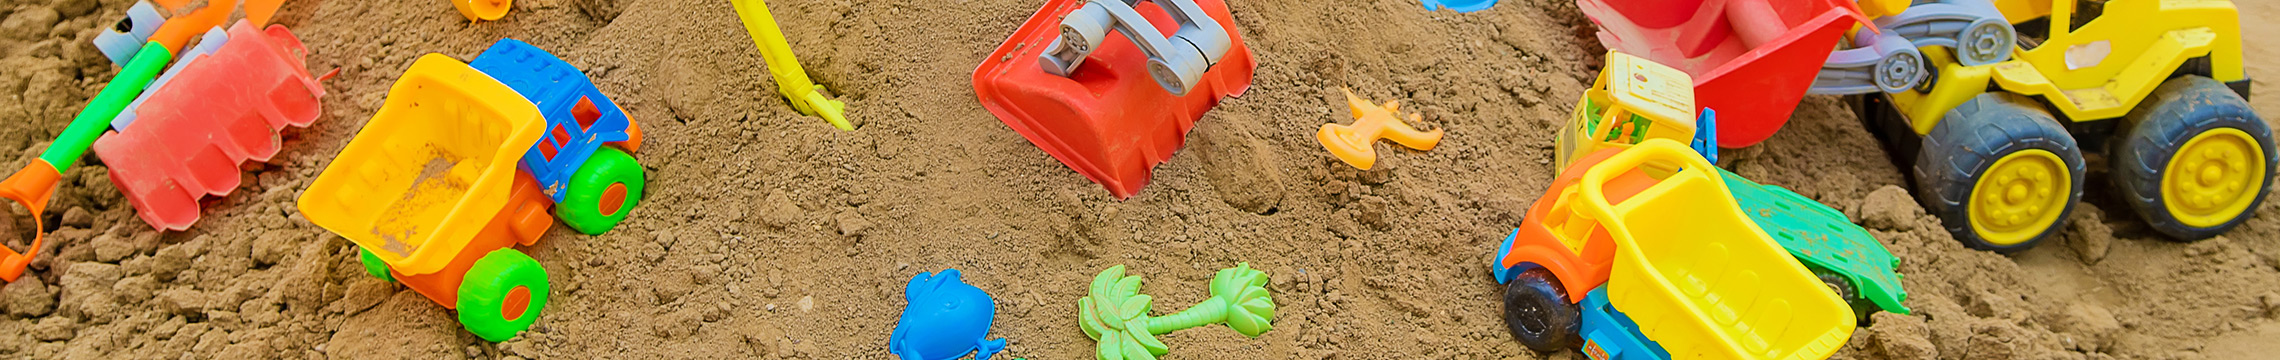 Variety of plastic sand toys scattered across a sand box